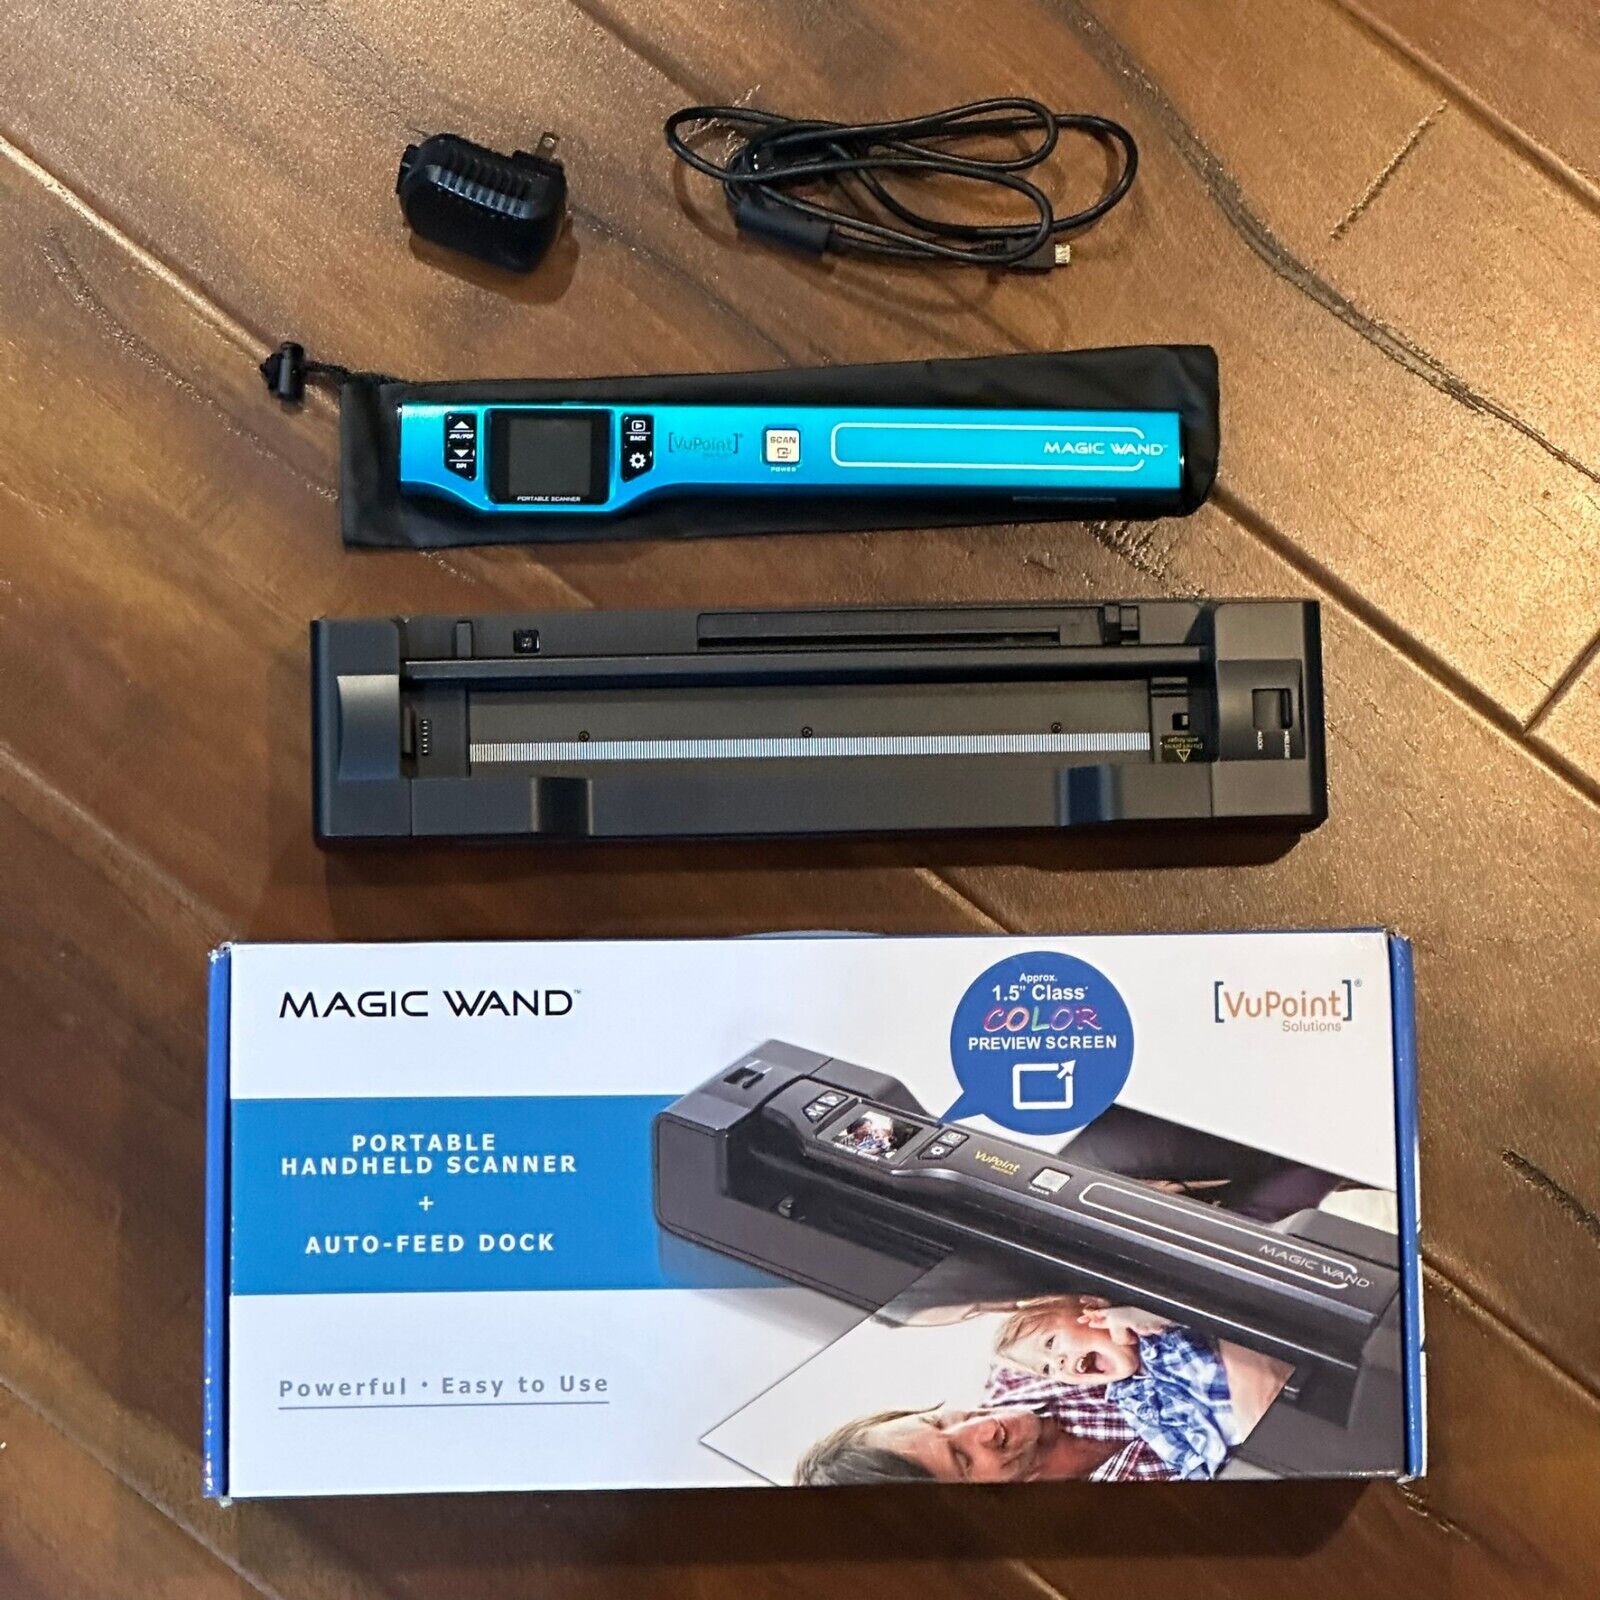 VuPoint Magic Wand Portable Scanner with Auto-Feed Dock Color LCD Display